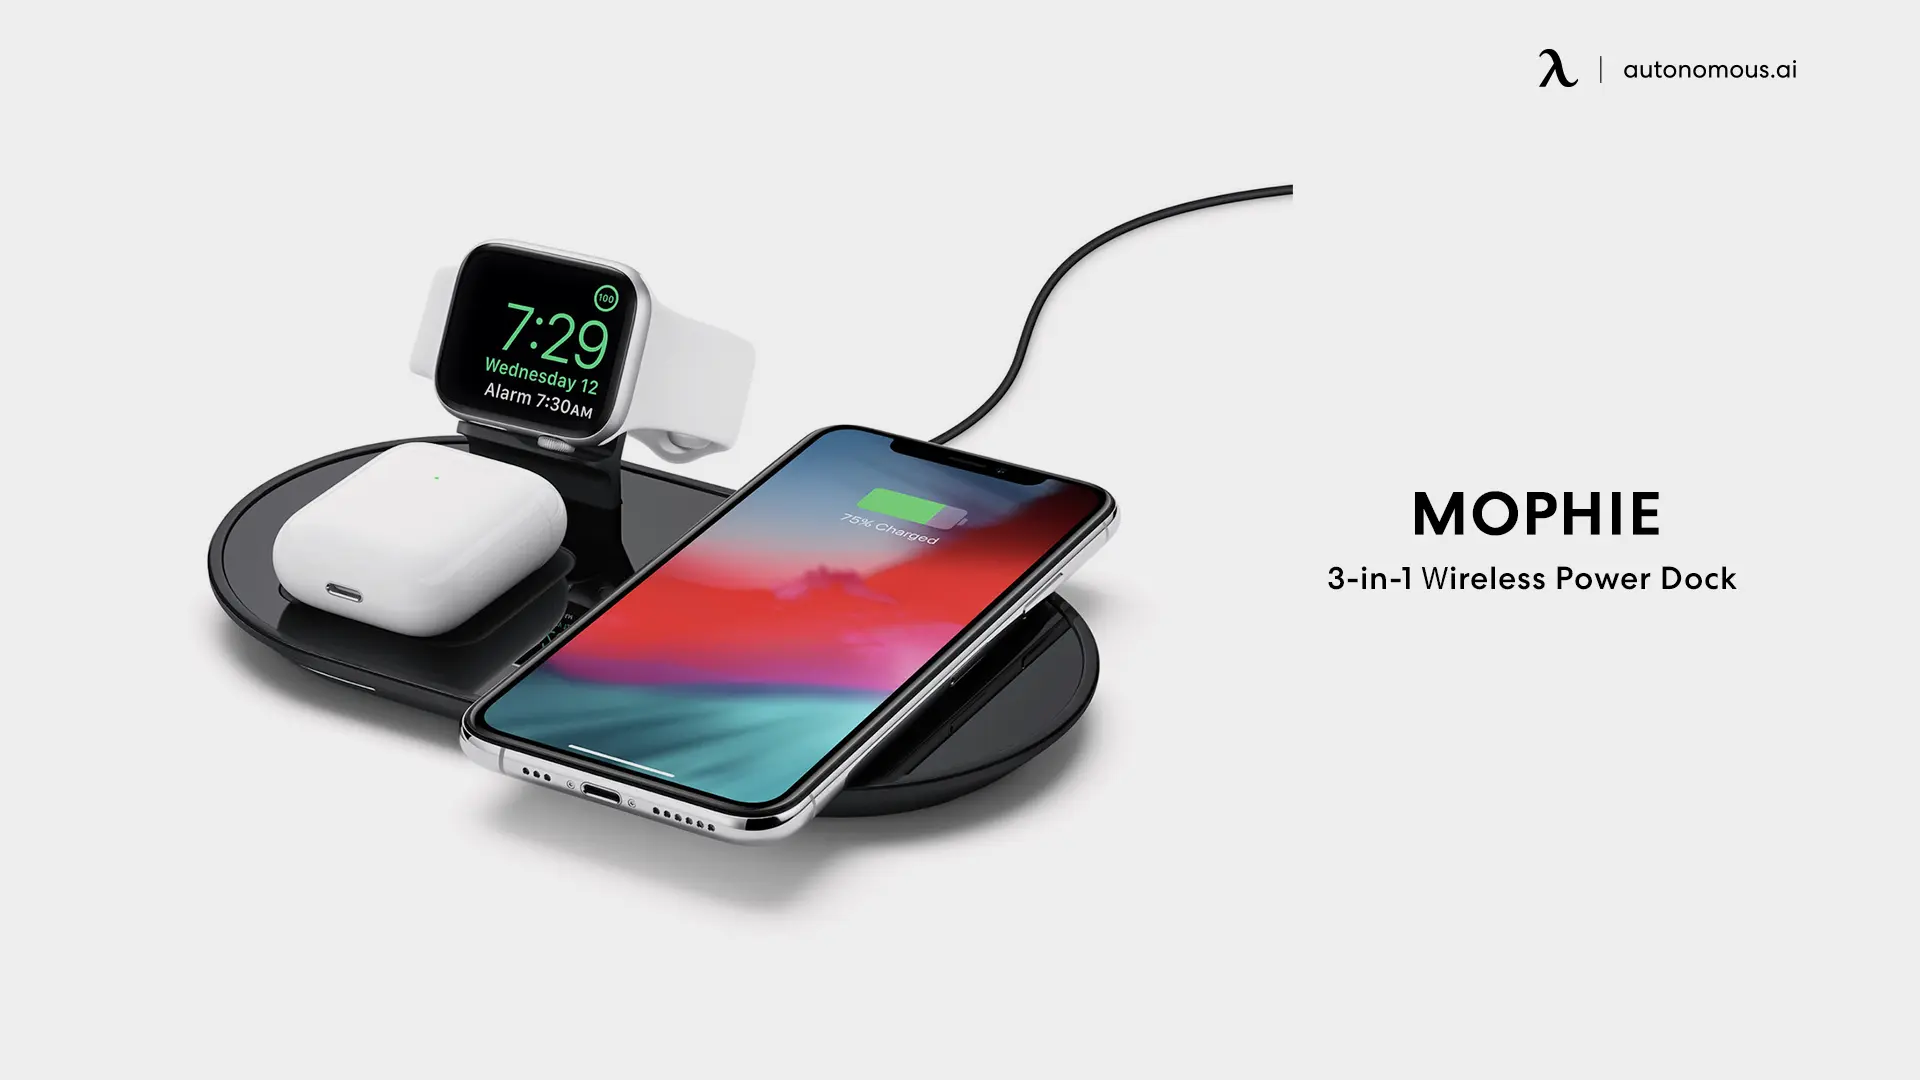 Mophie 3-in-1 iMac accessories